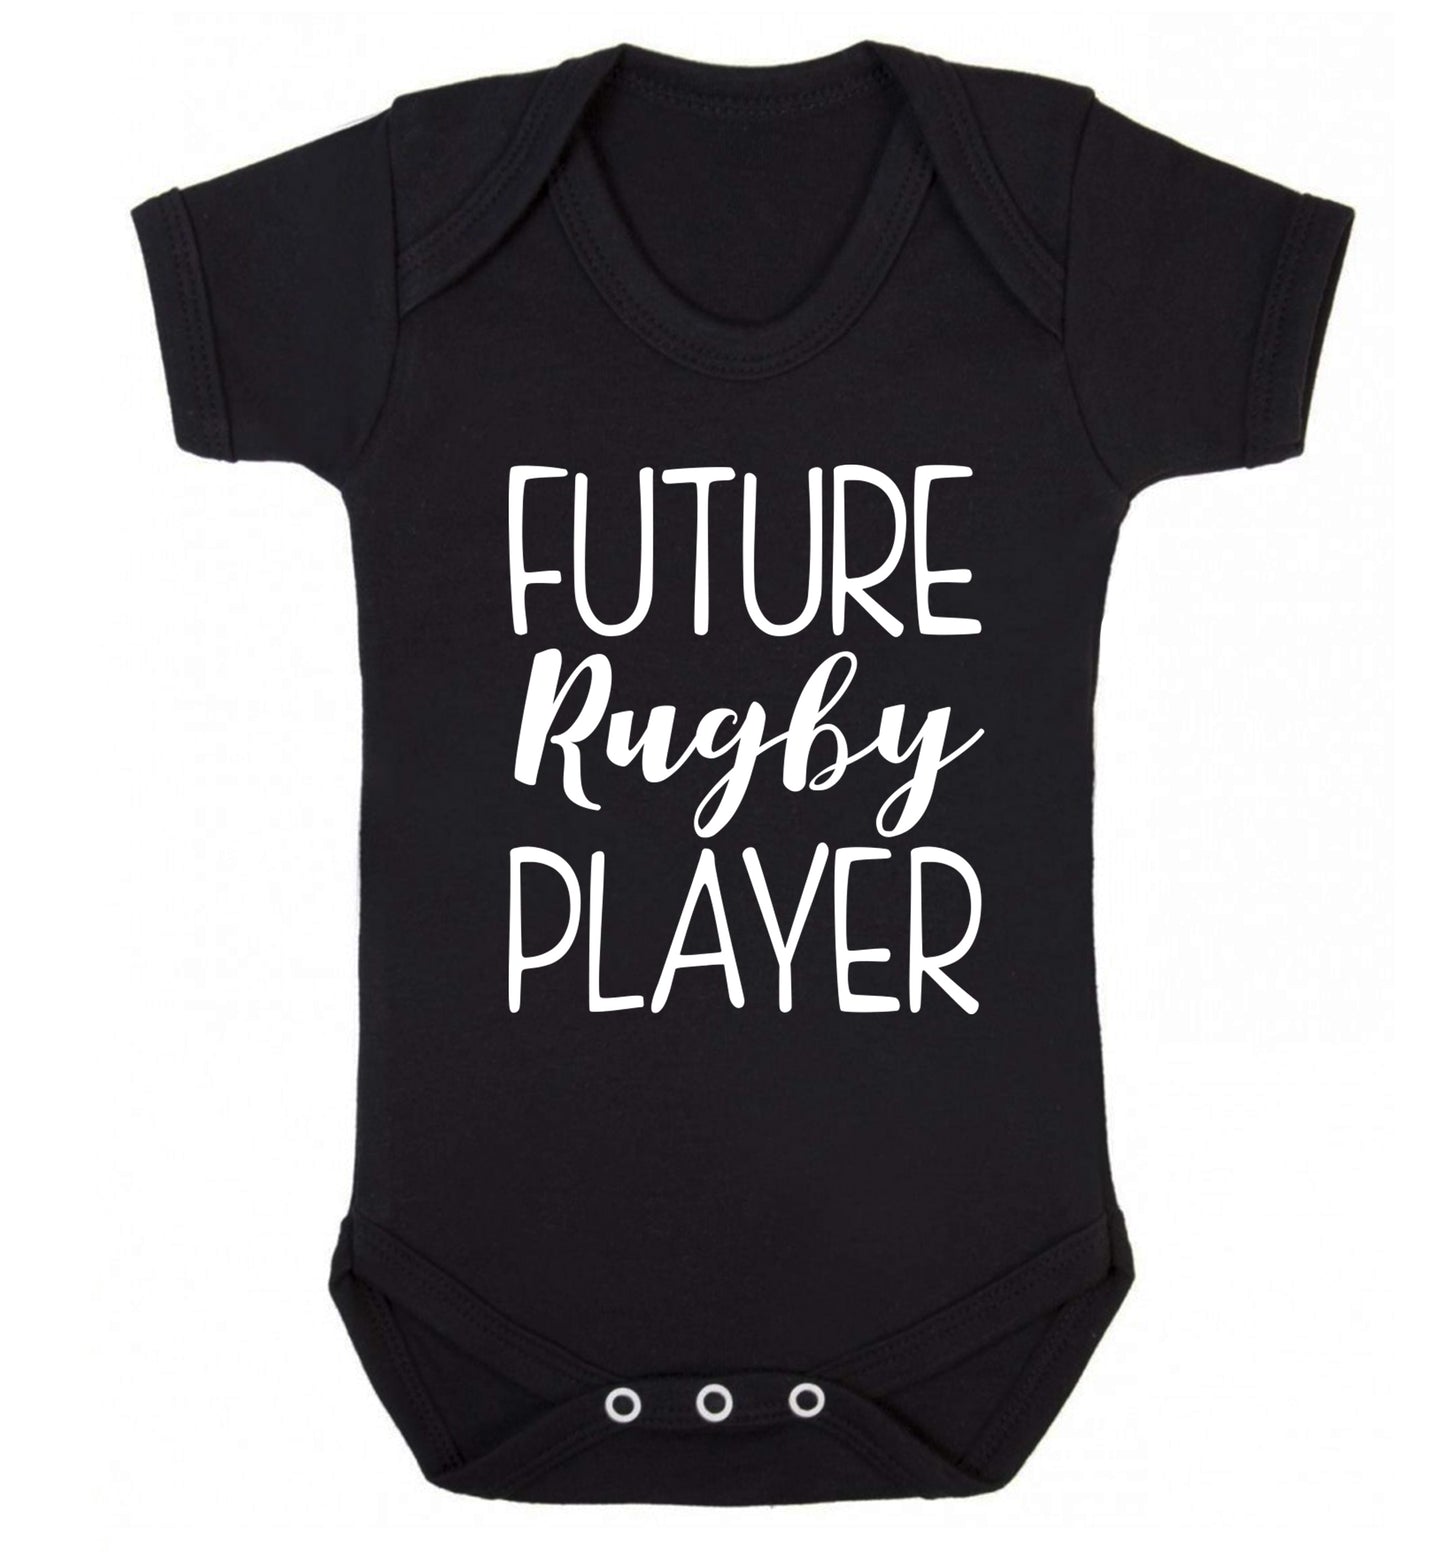 Future rugby player Baby Vest black 18-24 months